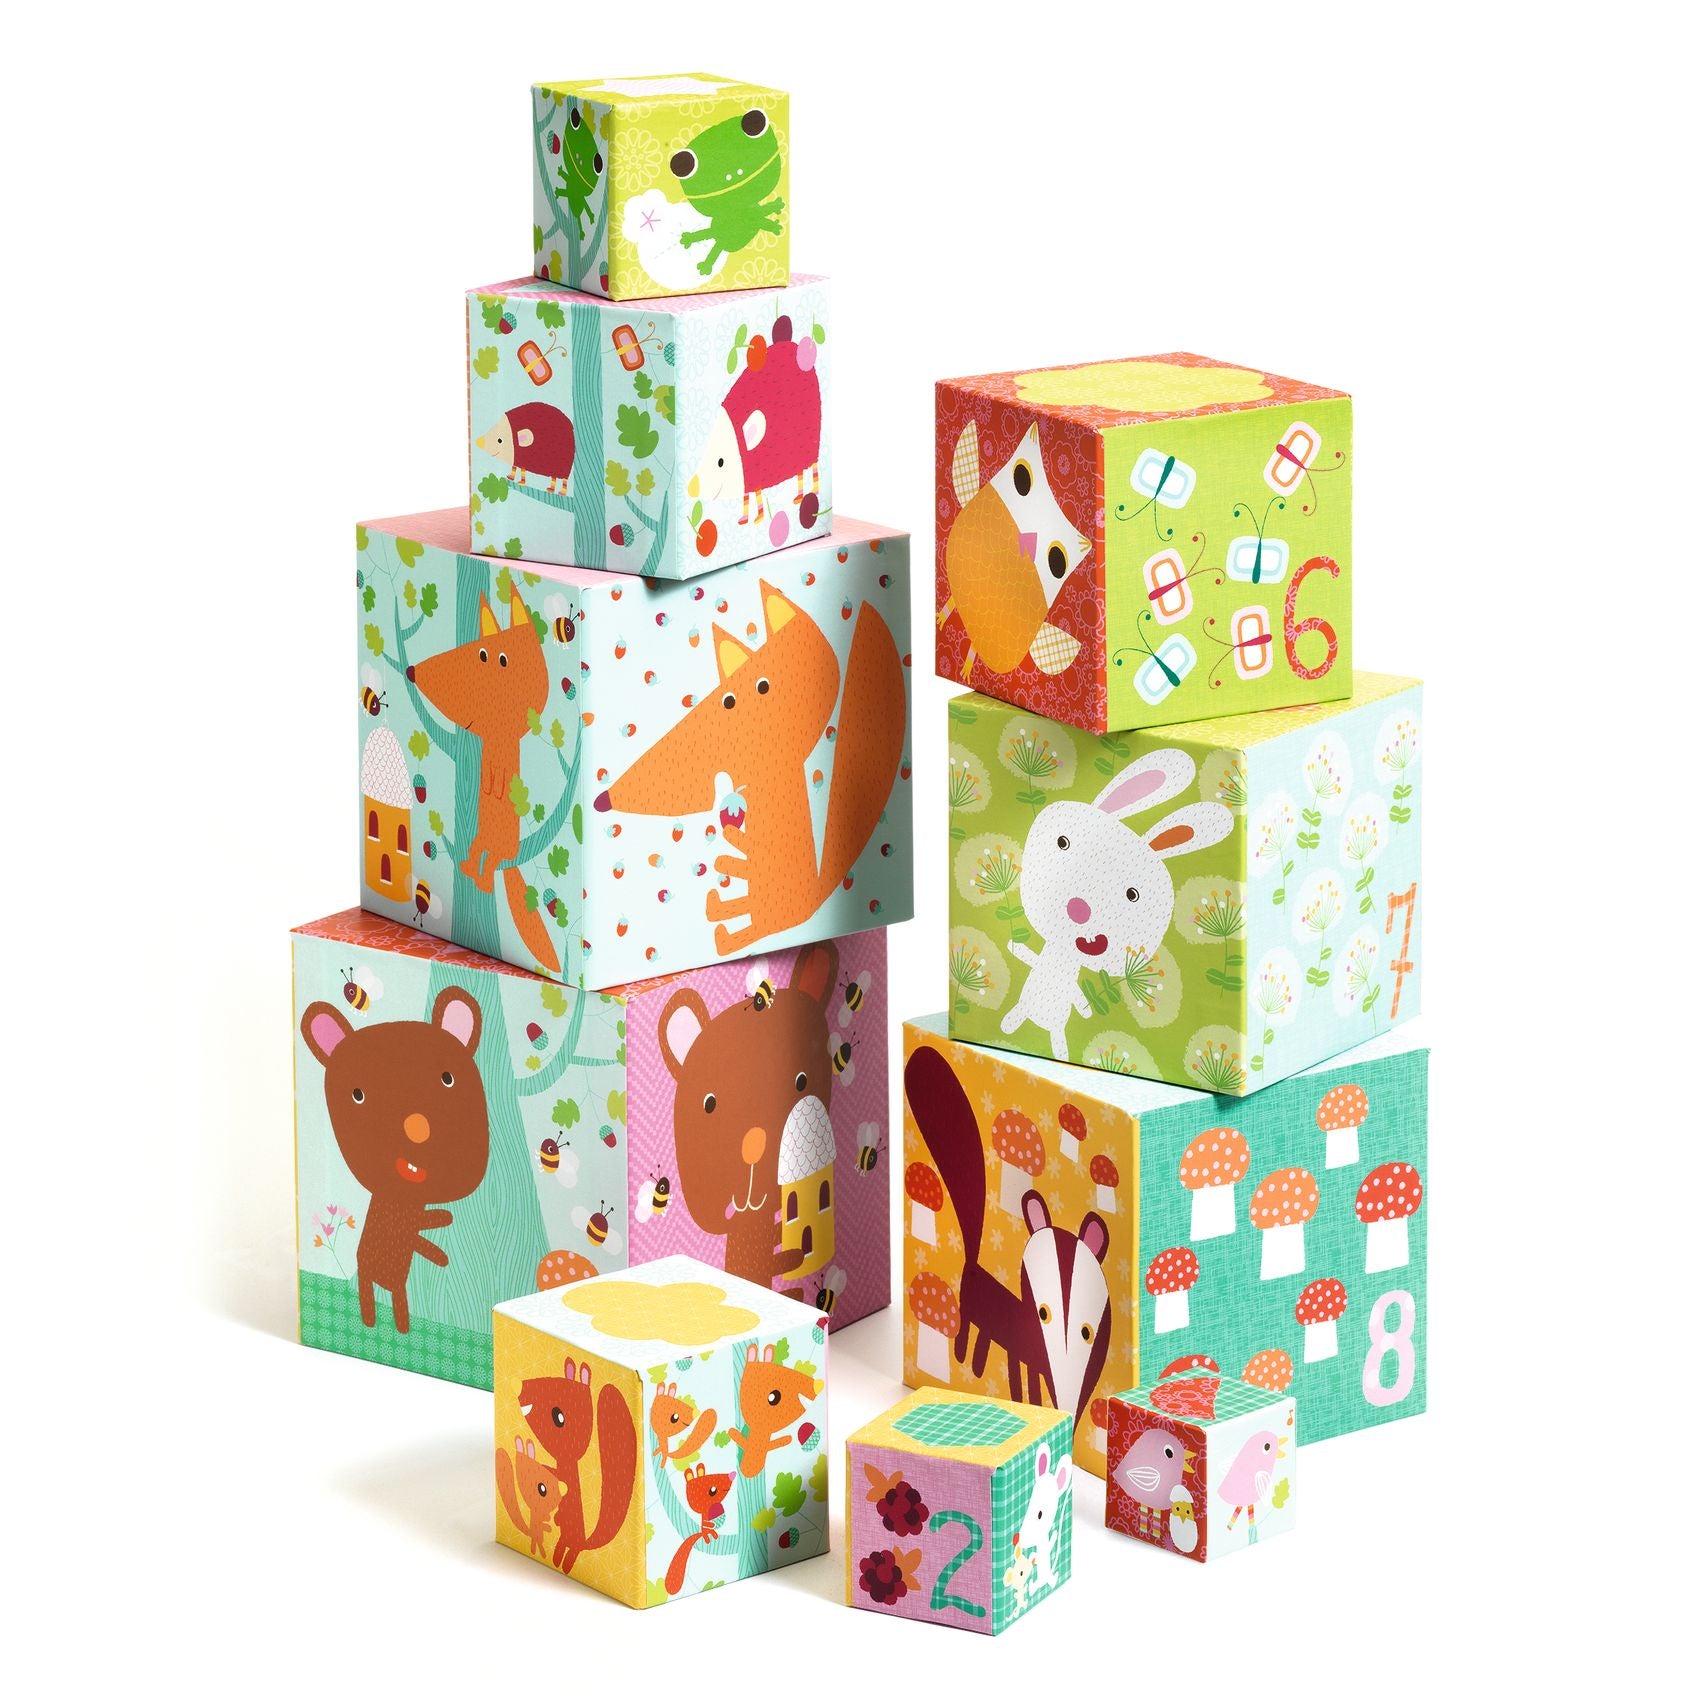 Djeco Stacking Cubes – Forest